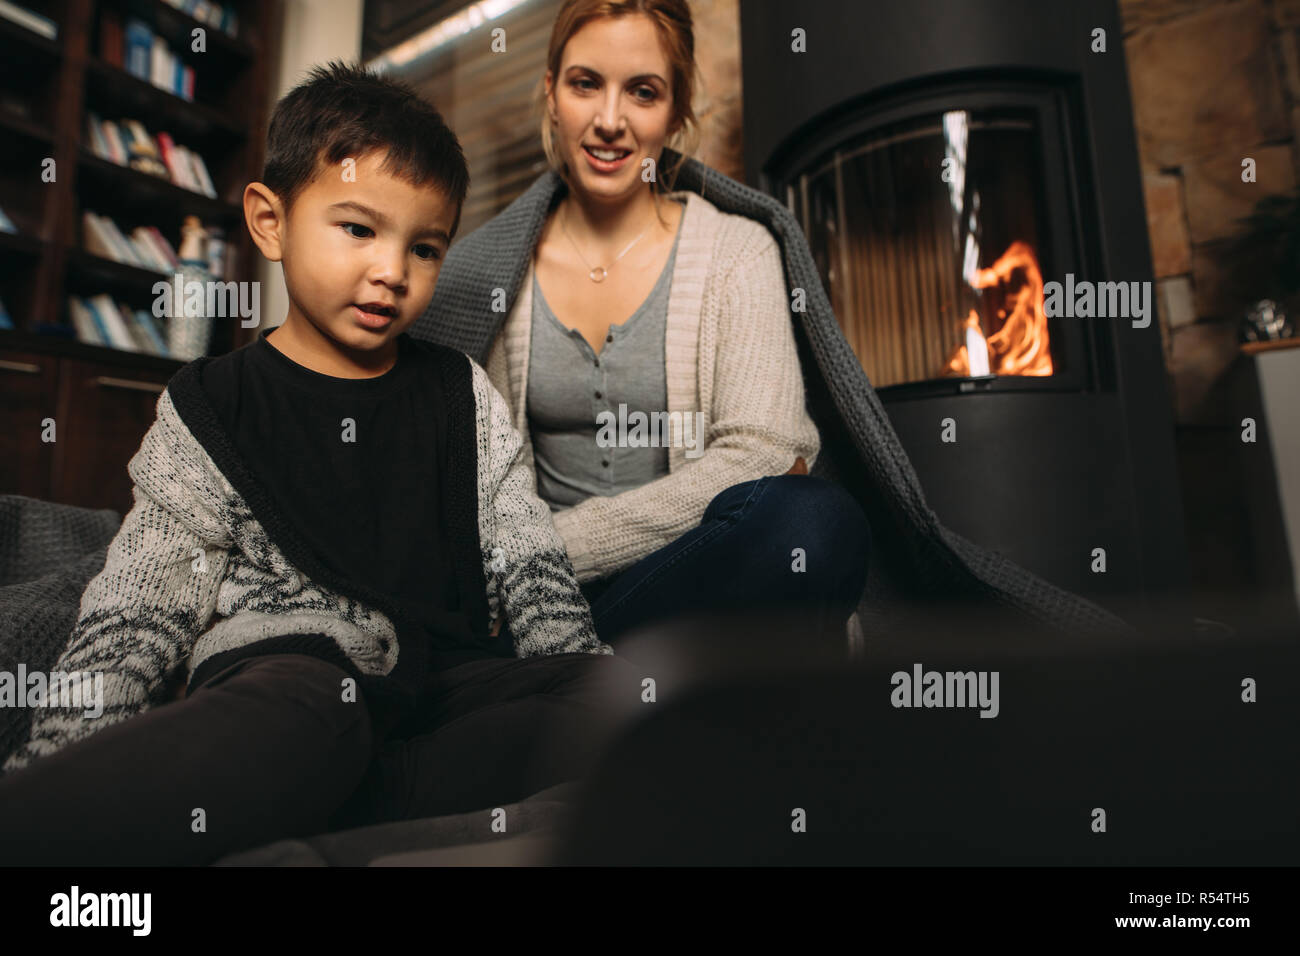 Little boy sitting on floor with his mother and looking at laptop. Son with his mother watching cartoon movie on laptop while sitting near fireplace i Stock Photo